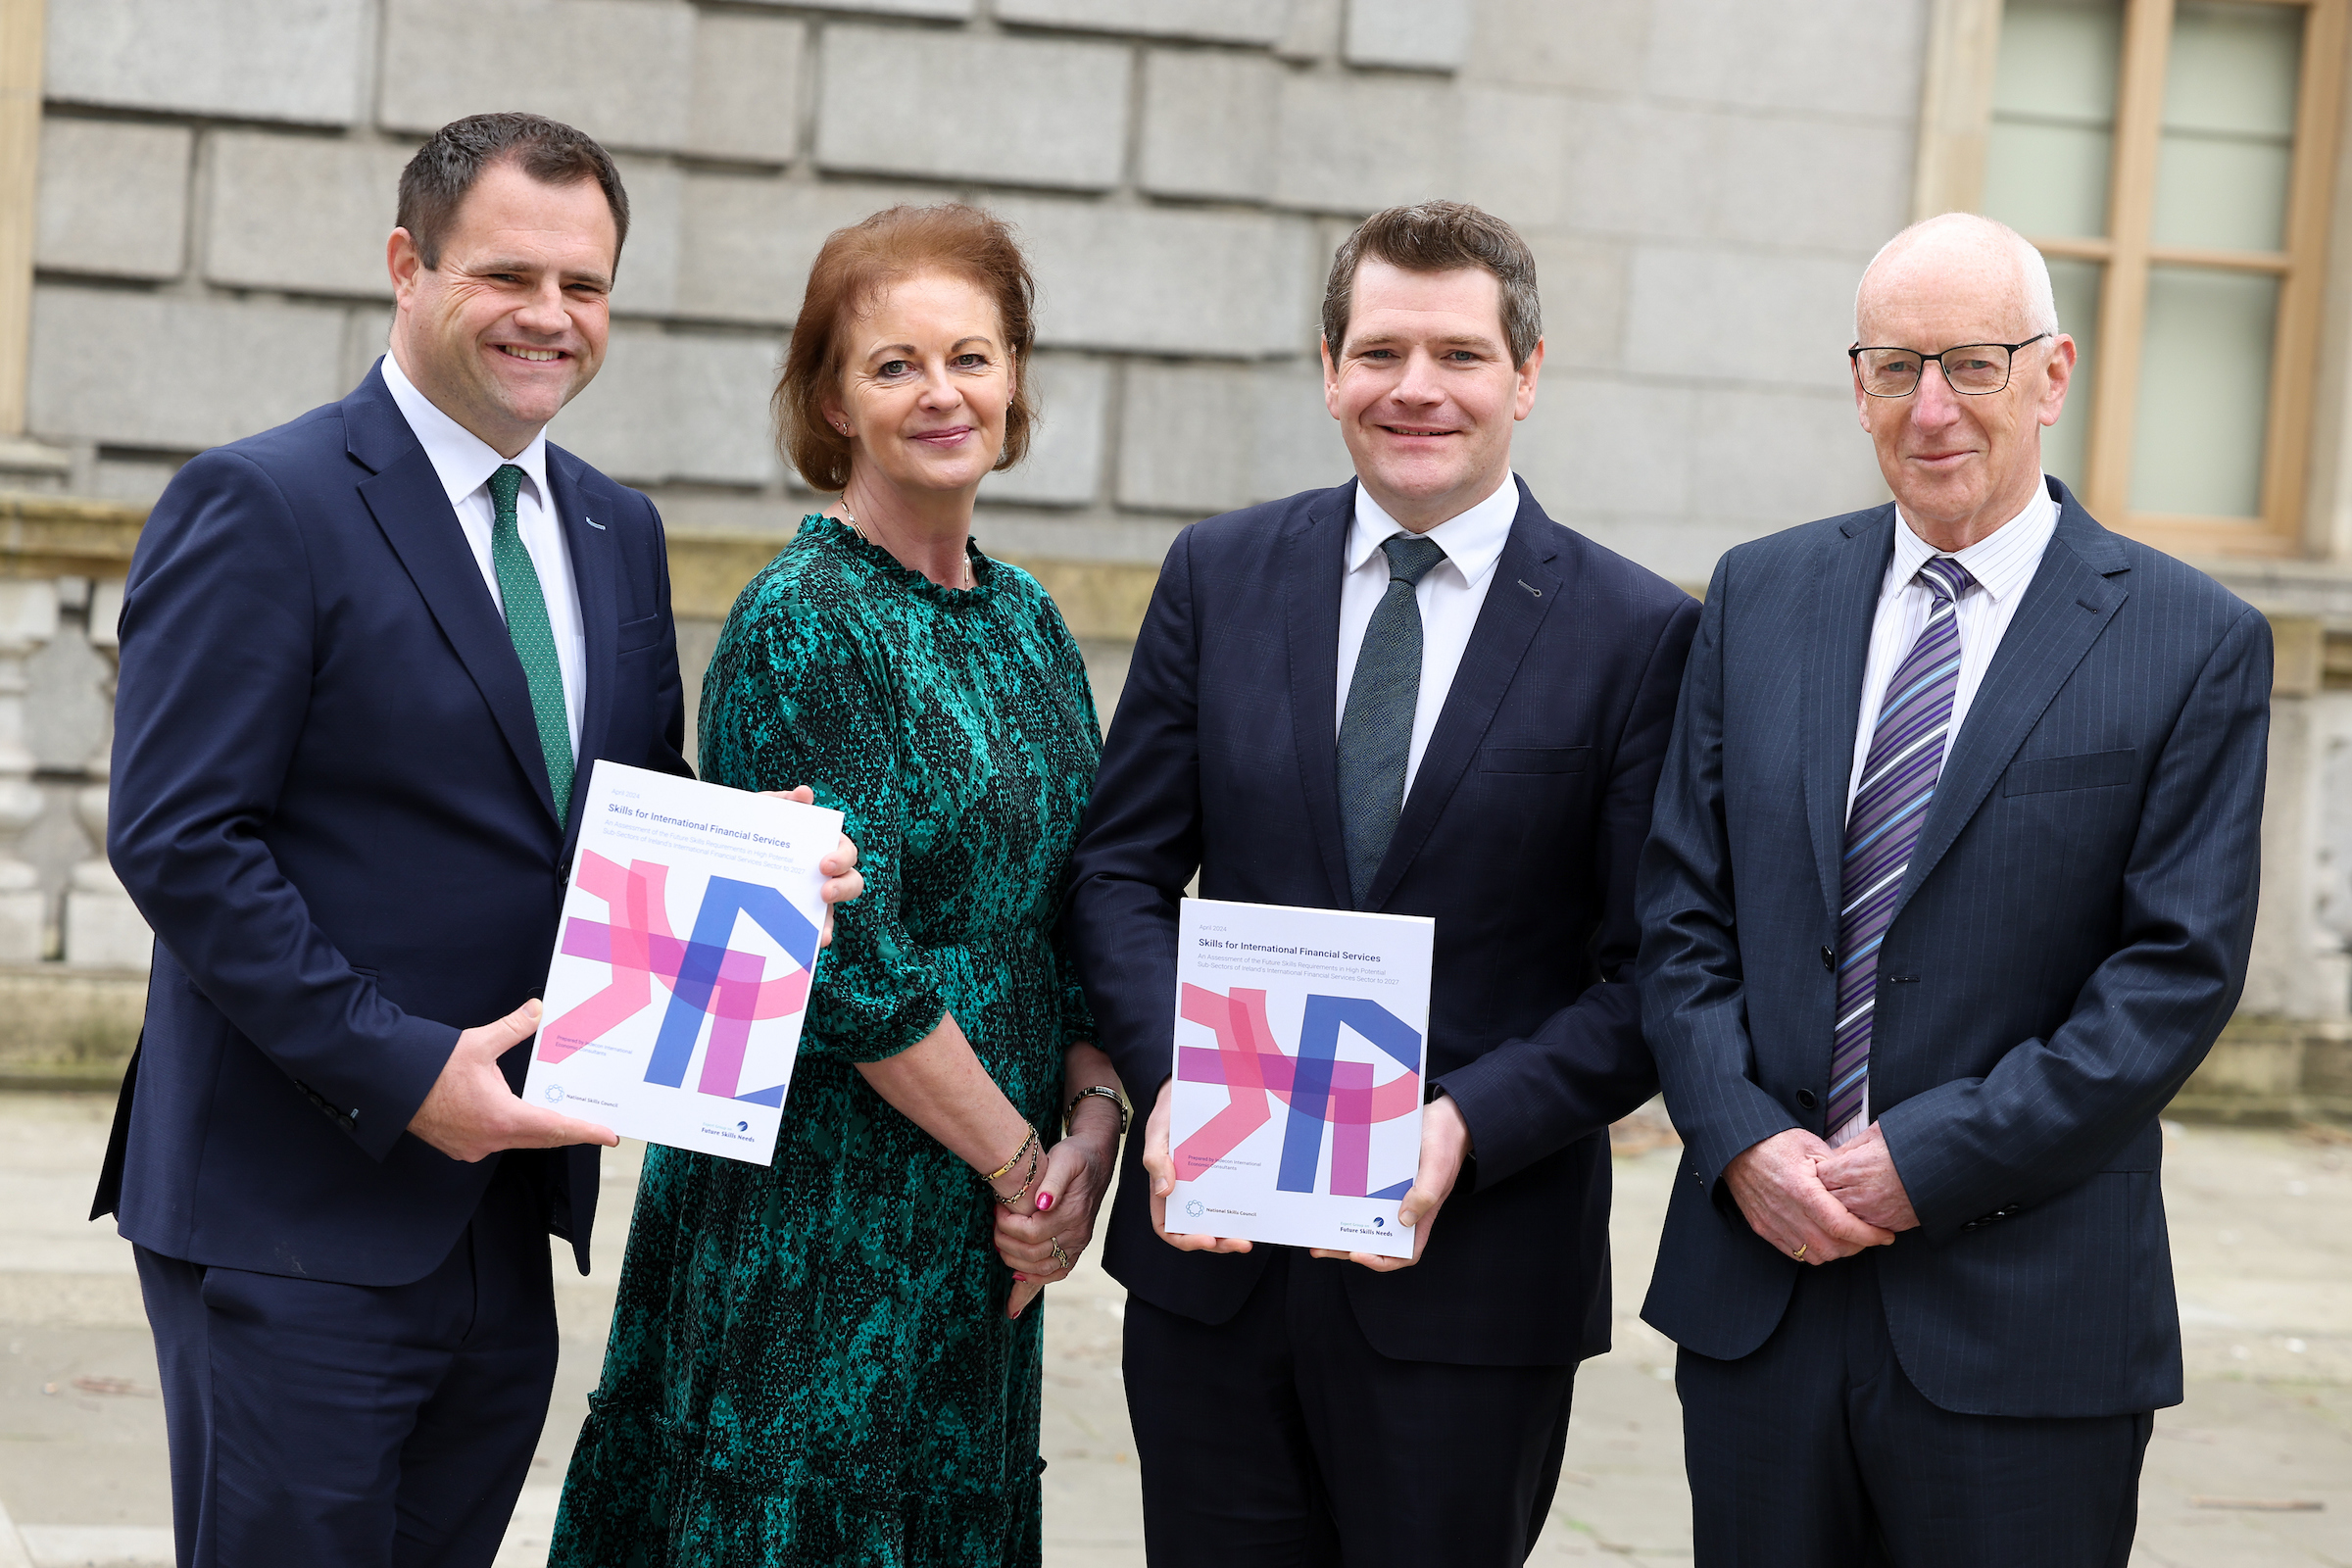  Minister Burke and Minister Richmond welcome report on future skills needs for the International Financial Services sector 